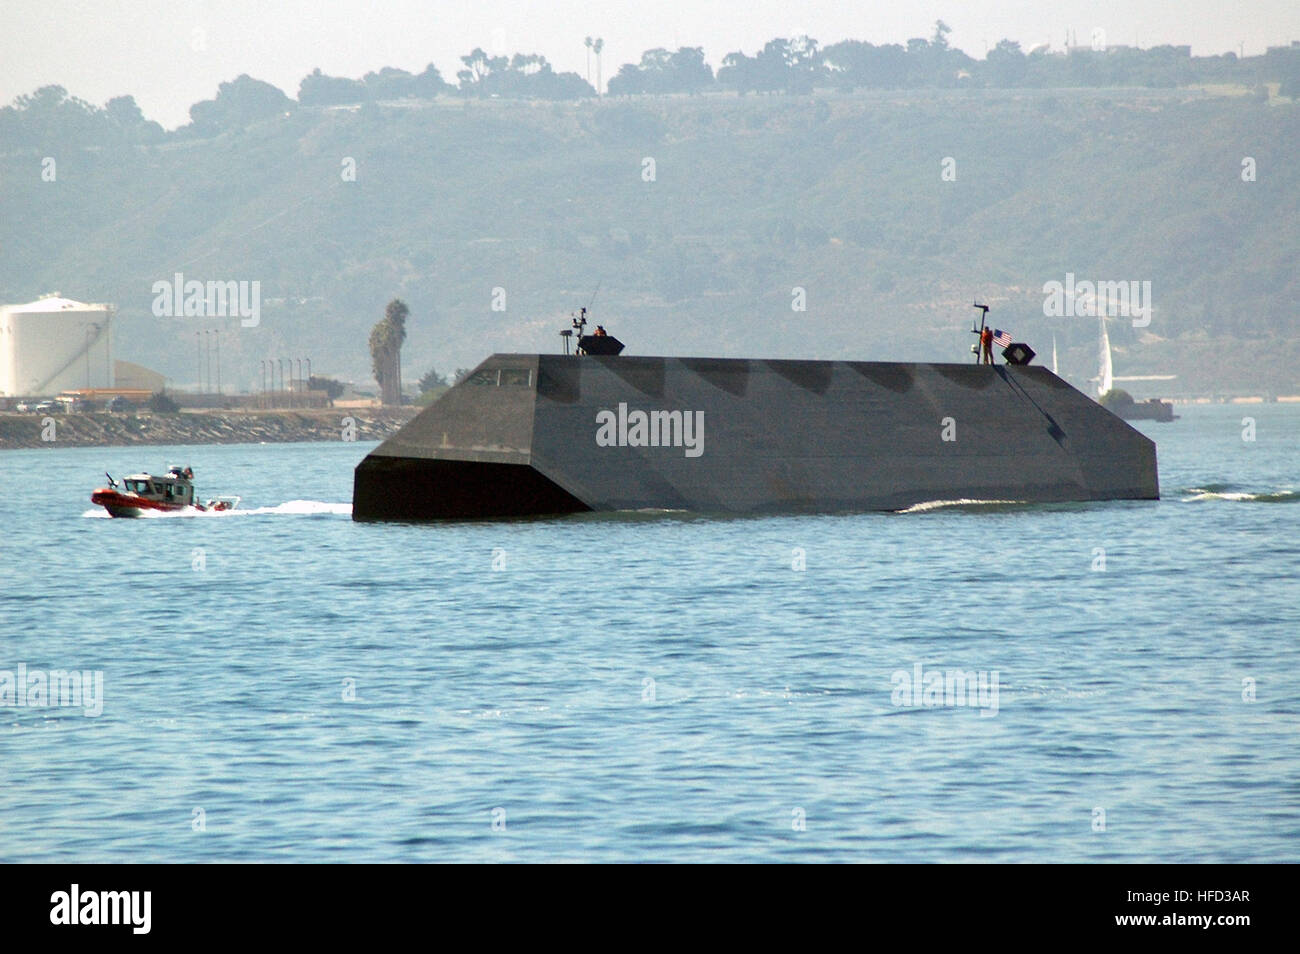 The US Navy (USN) test craft, SEA SHADOW, underway in the Sea and Air Parade, held as part of Fleet Week San Diego 2005. Fleet Week San Diego is a three-week tribute to Southern California area military members and their families. Sea Shadow Fleetweek Stock Photo